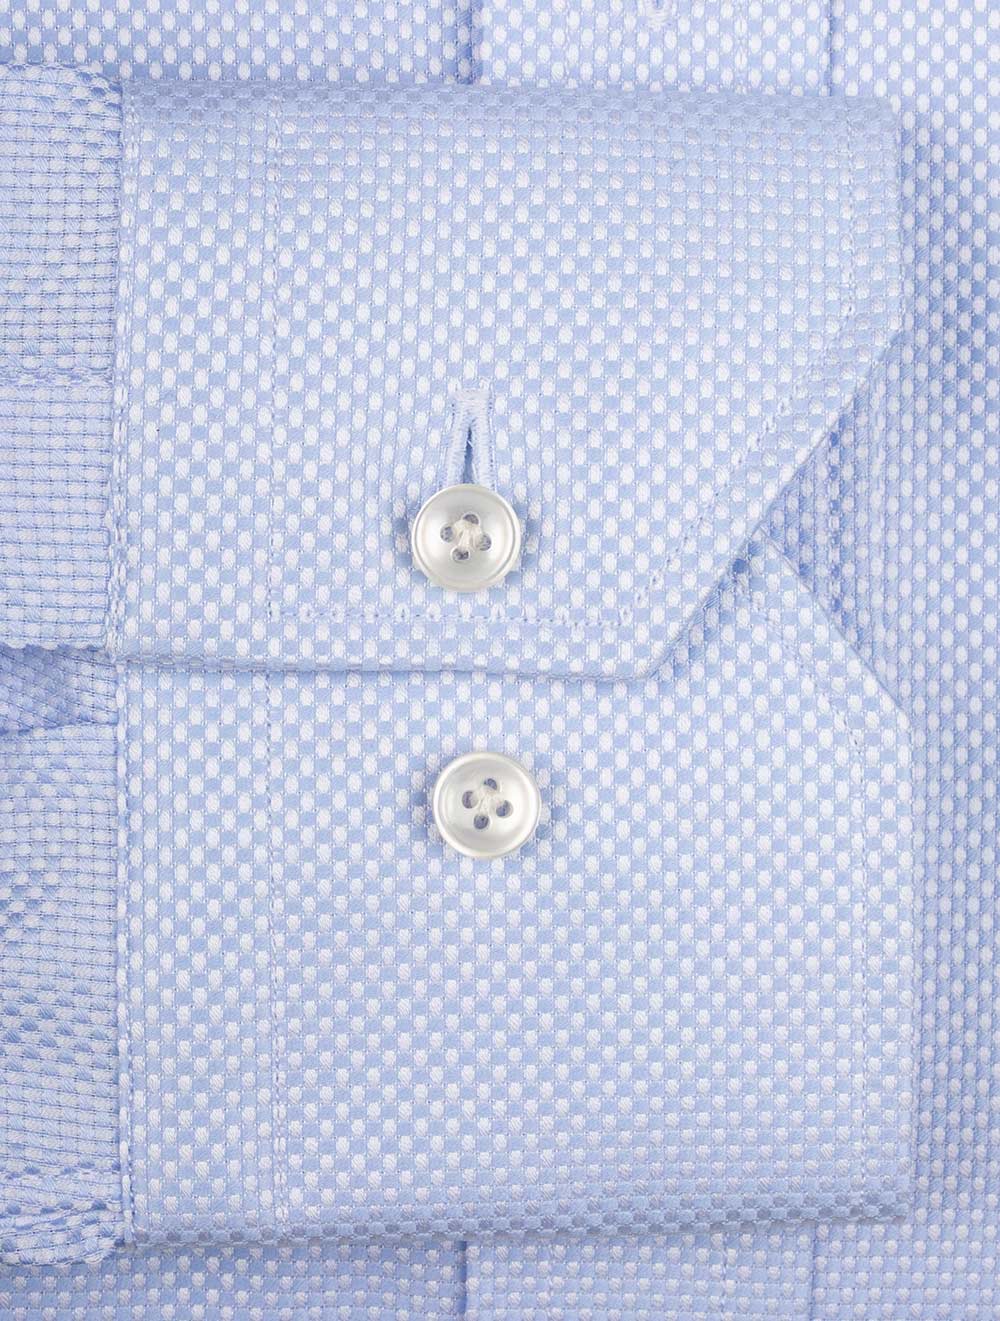 Classic Fit Pinpoint Single Cuff Shirt Blue